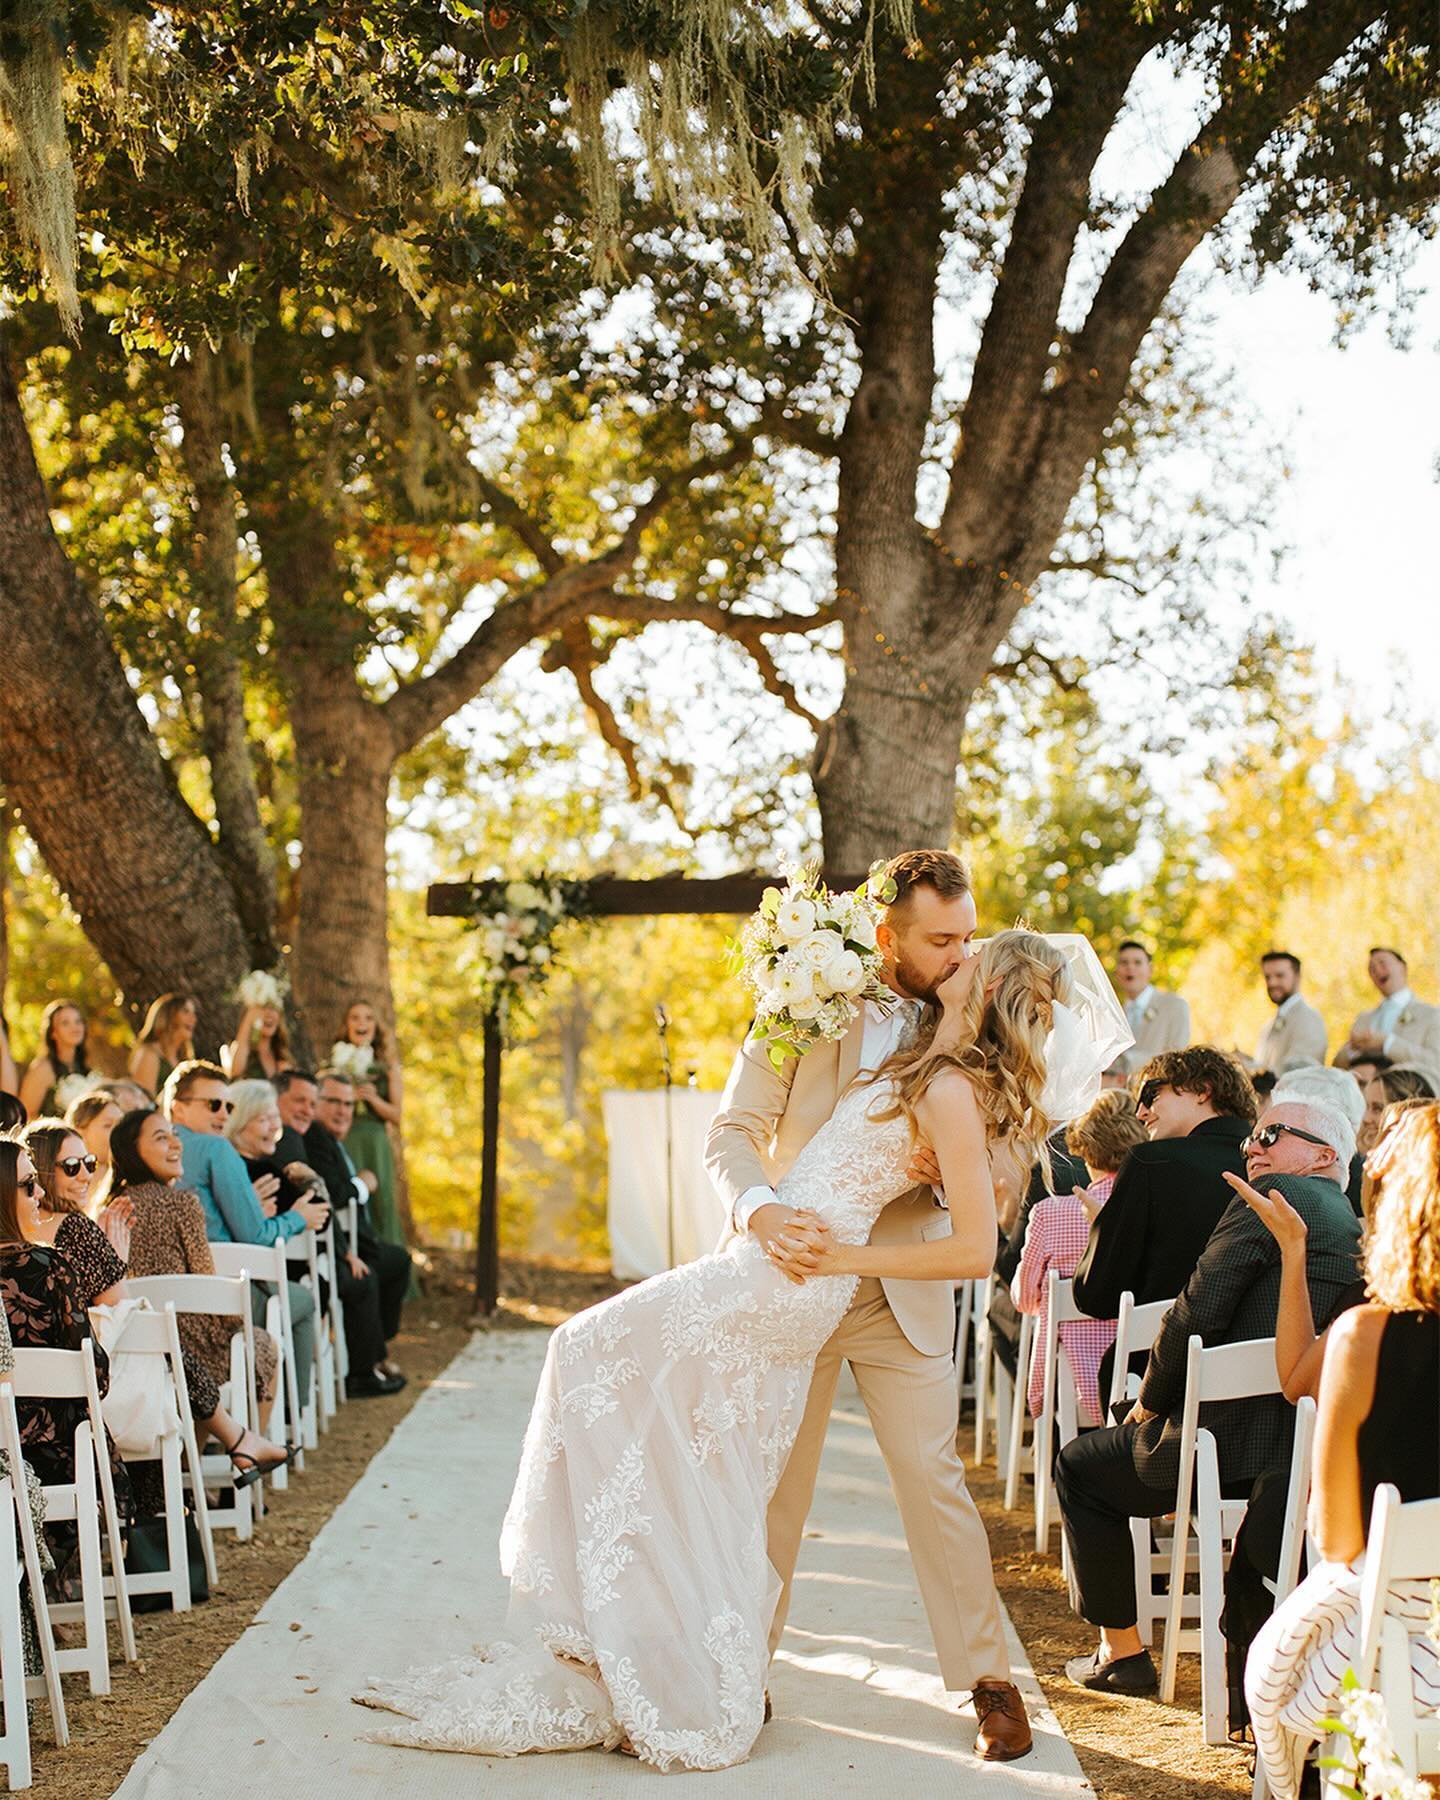 It was during Sarah and Austin&rsquo;s ceremony last year I realized that I wasn&rsquo;t ready to hang up the camera just yet. I was hit by a wave of emotion that I really can&rsquo;t do a better job than this 🥹. 

A Christ-centered ceremony between